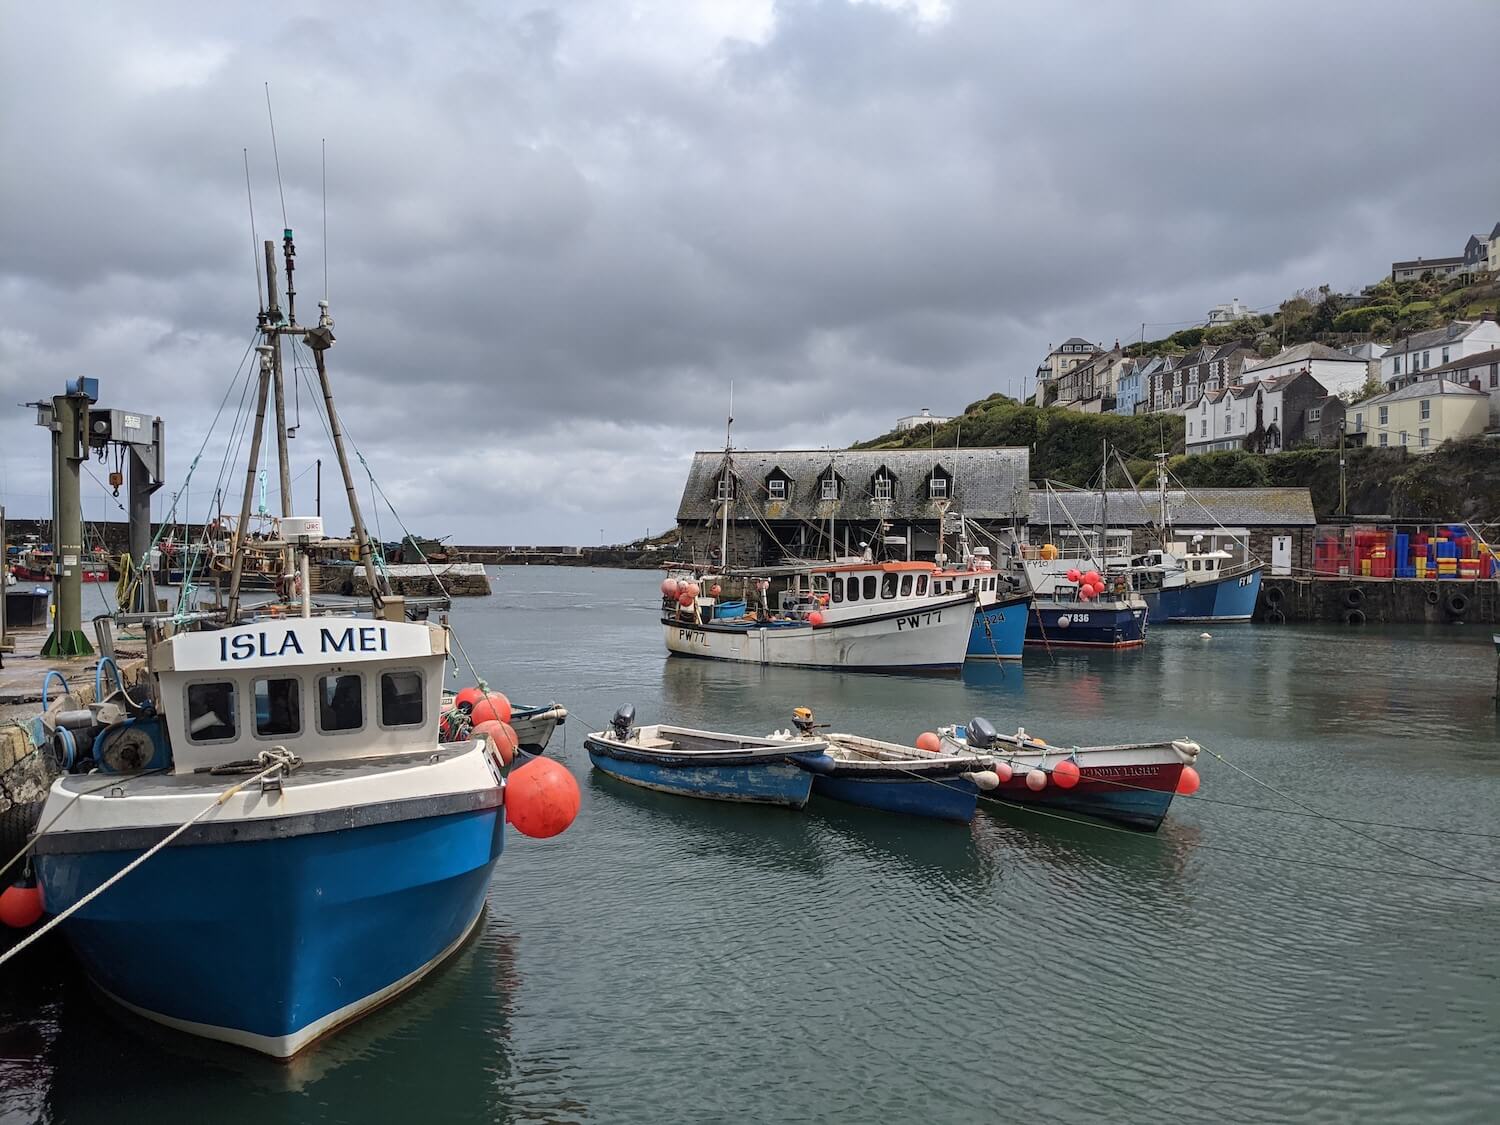 Visiting Mevagissey